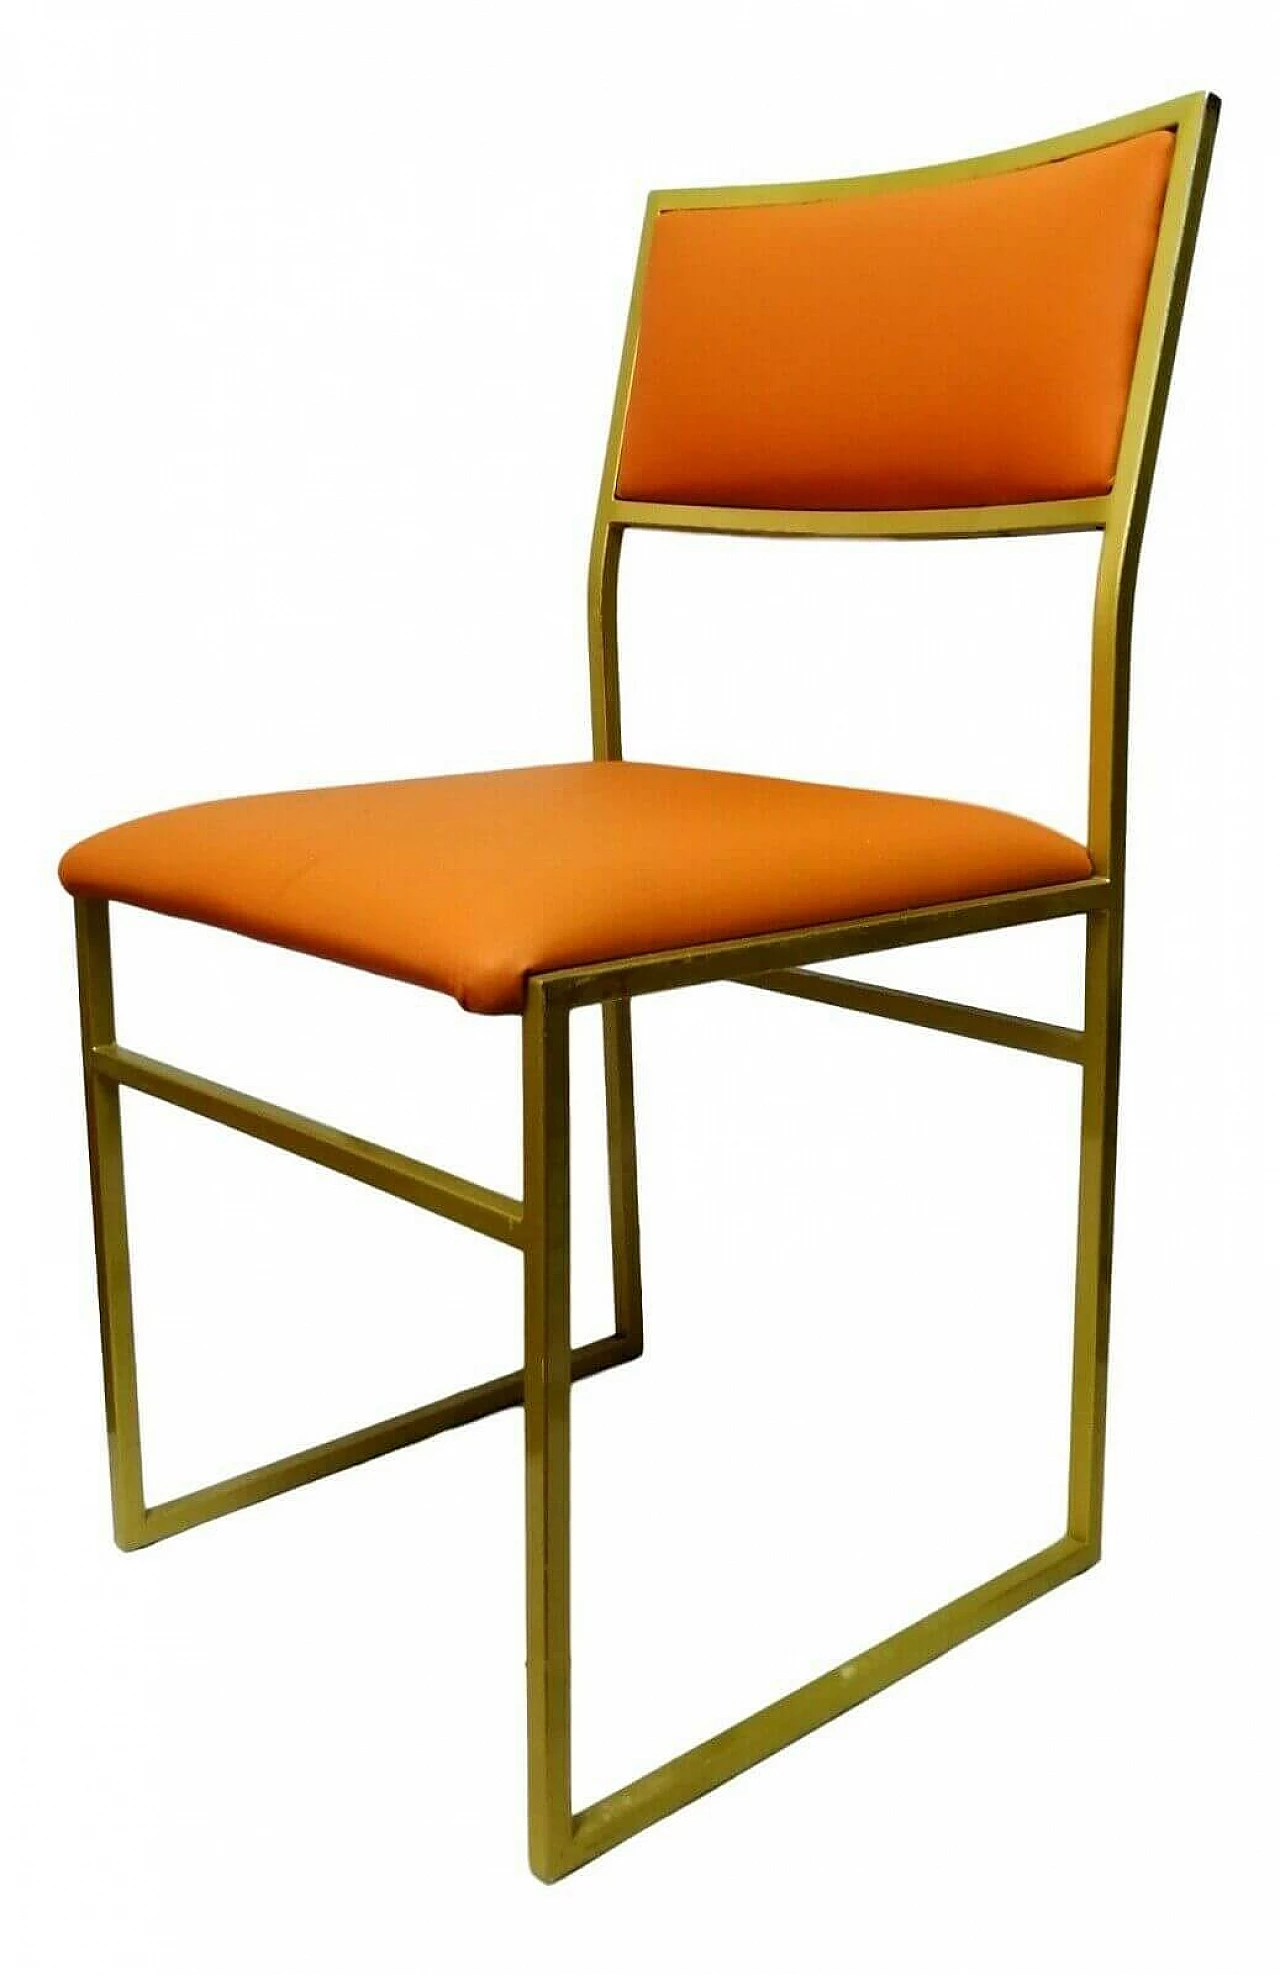 Metal chair and apricot-colored seat, 70s 1166226